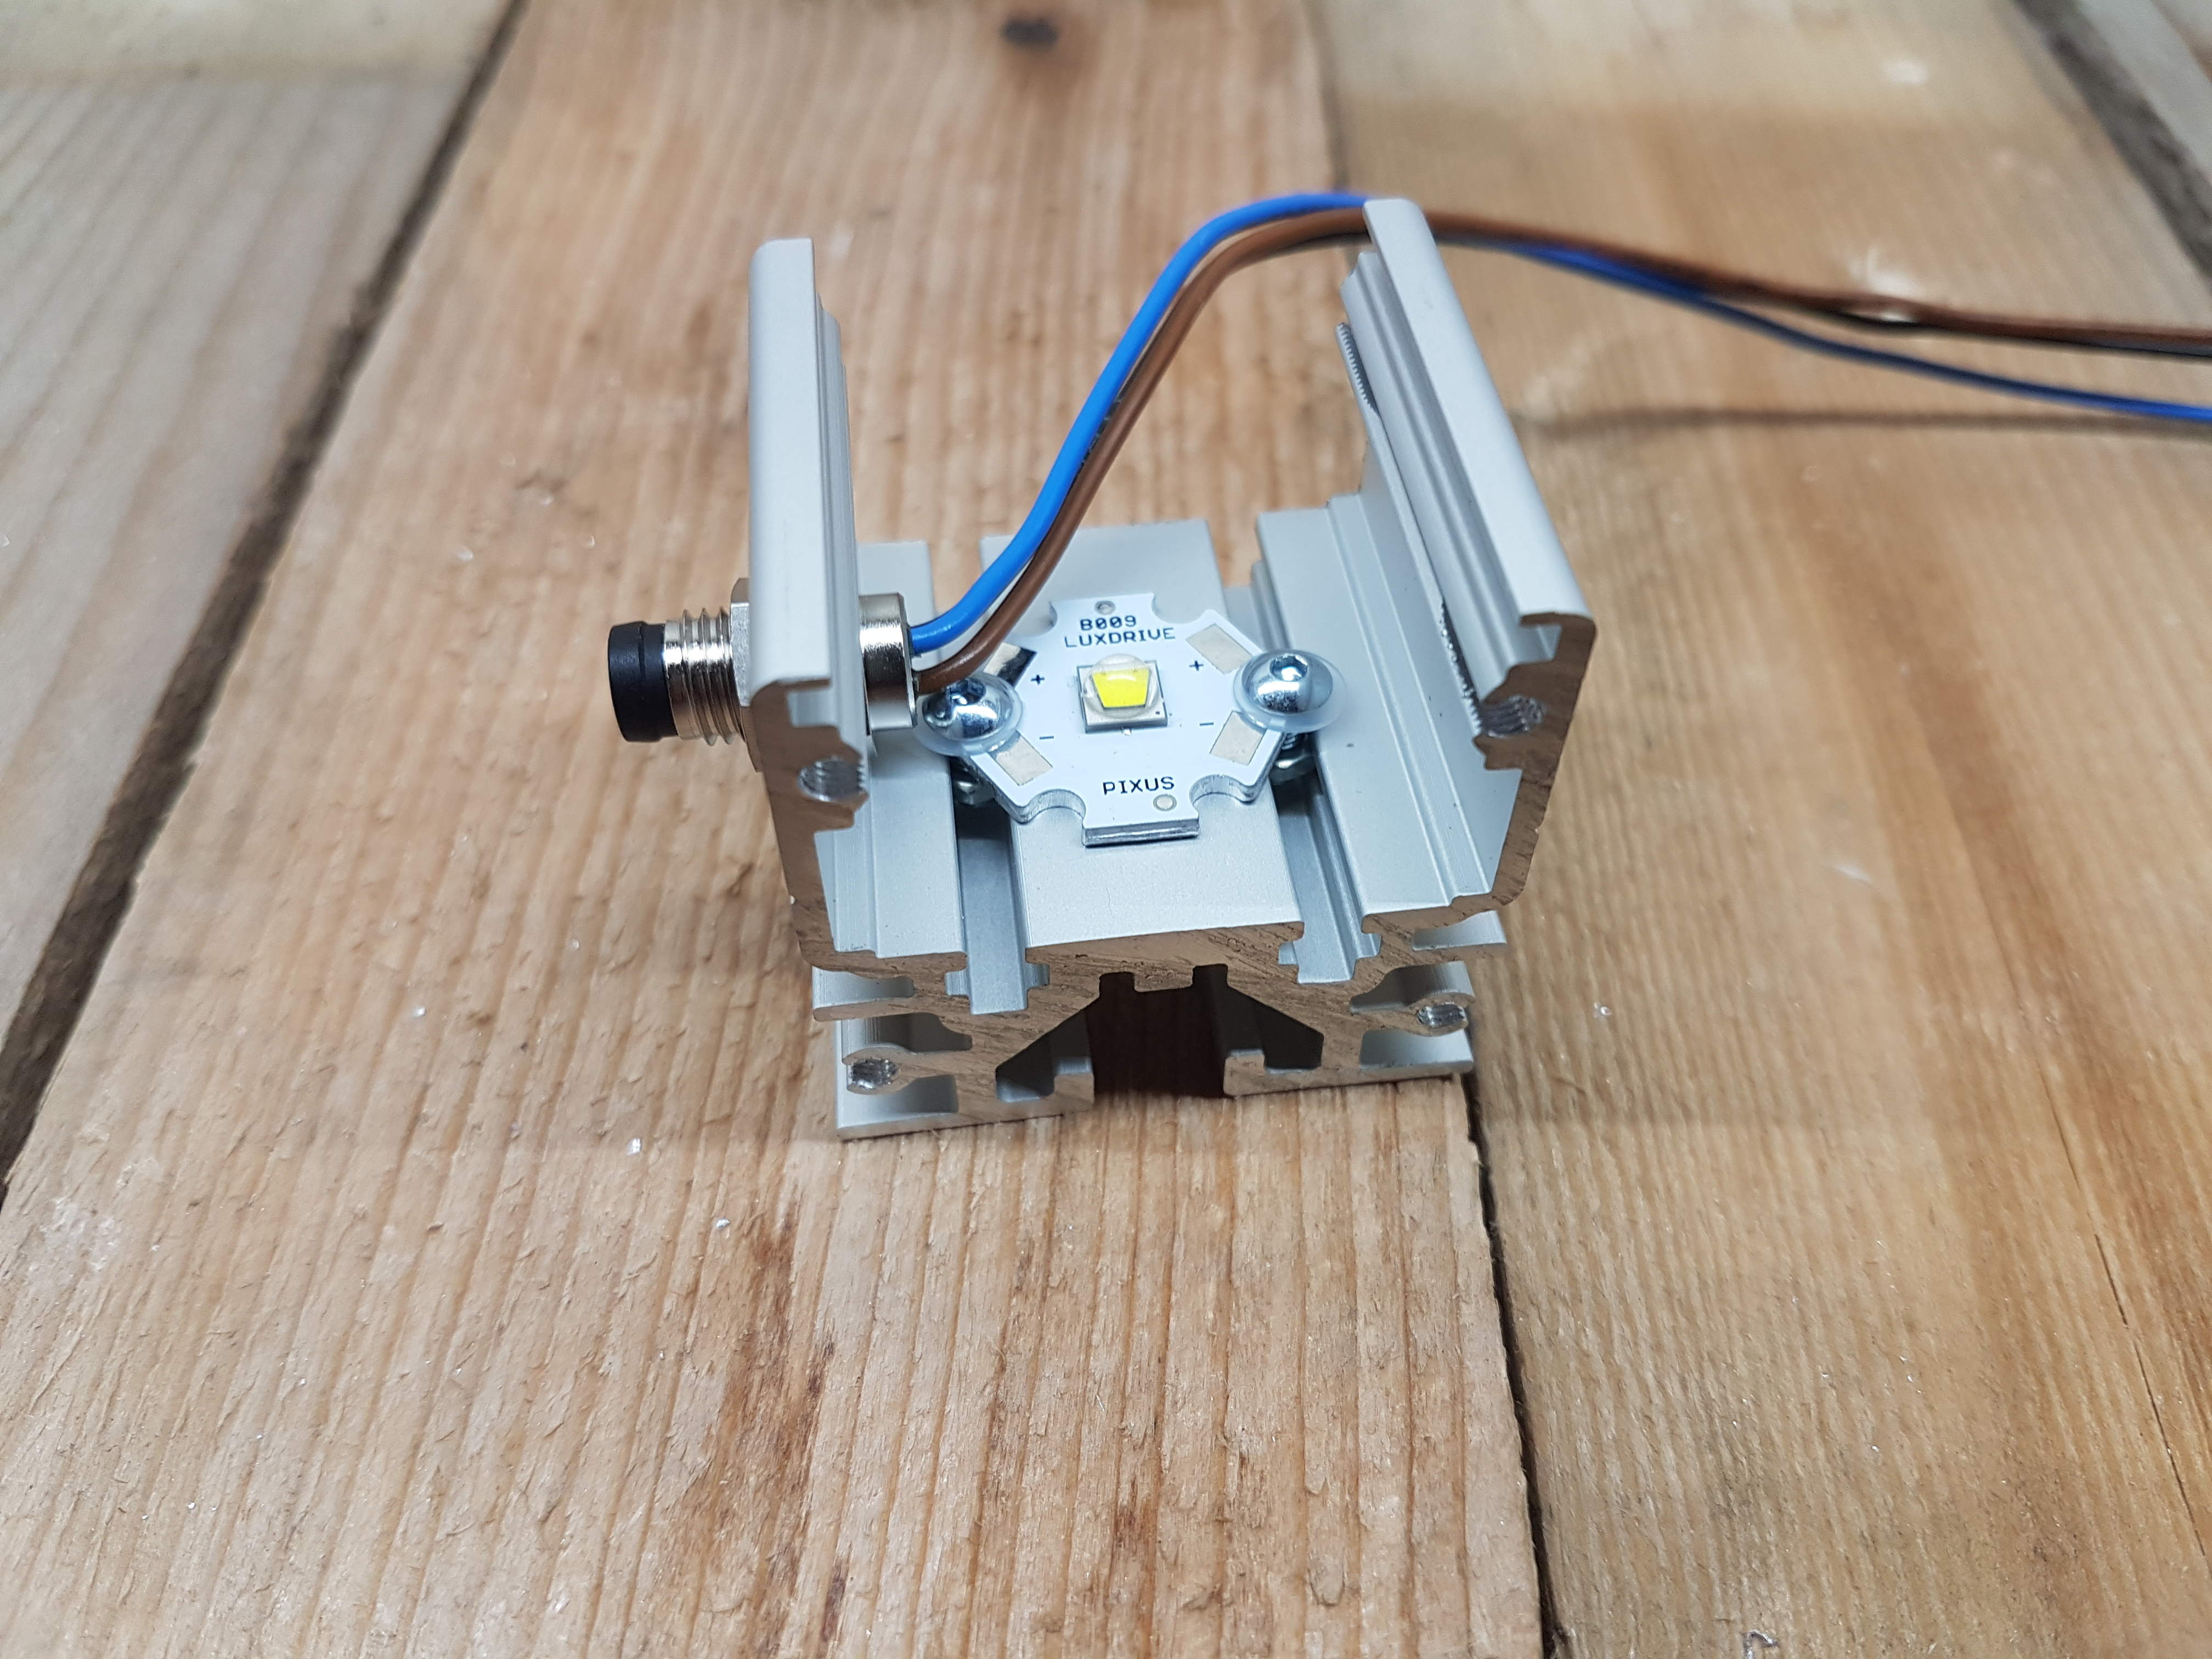 Attach the installed connector to Star MCPCB with LED